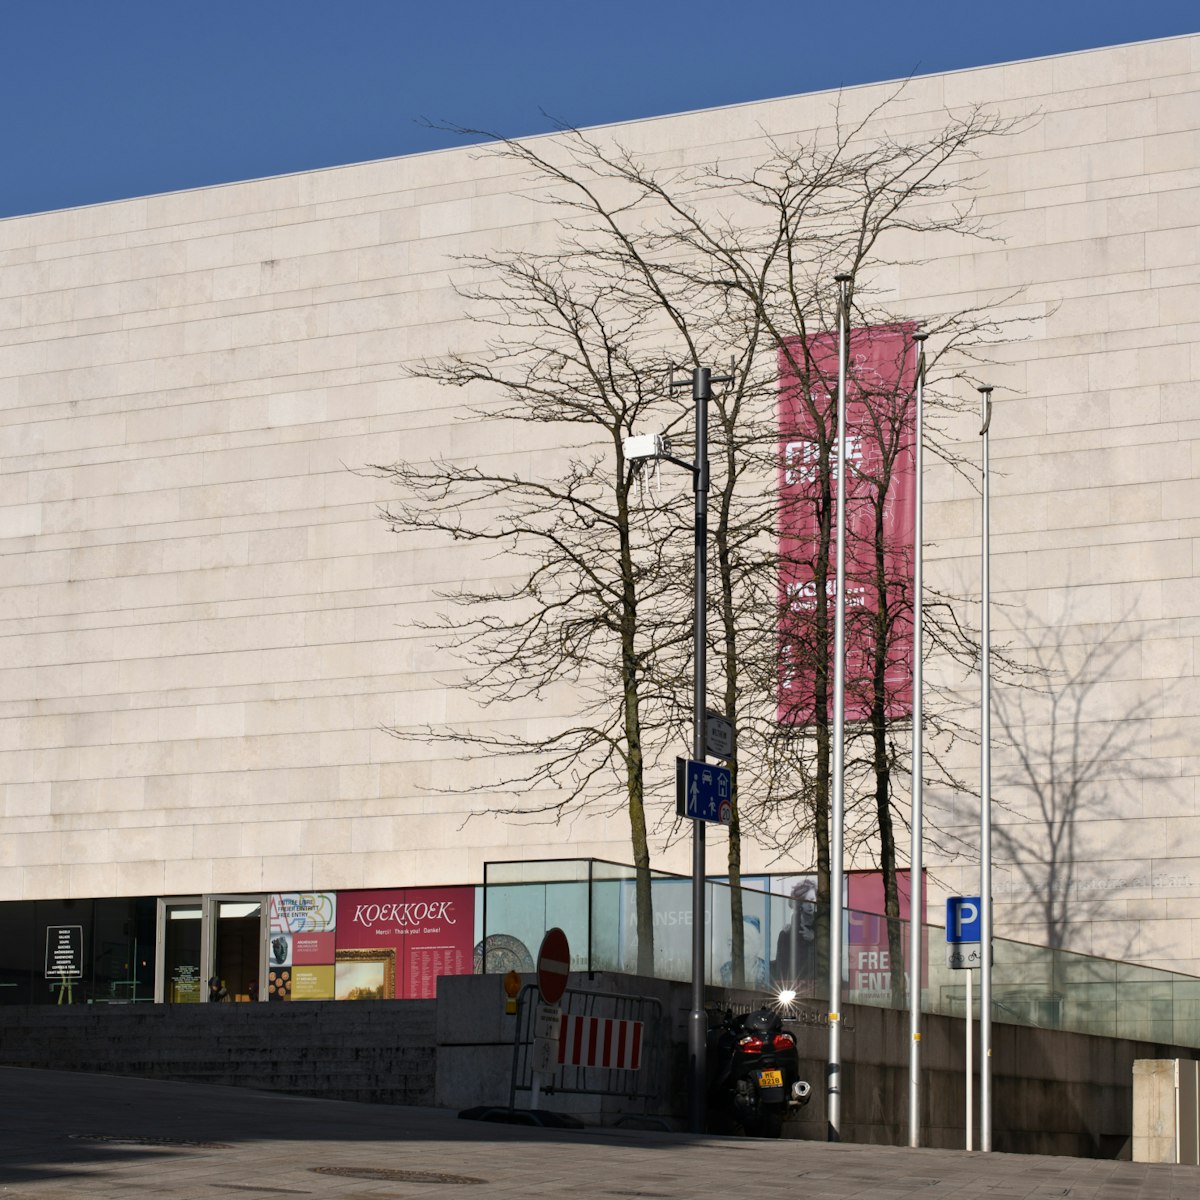 The National Museum of History and Art, Luxembourg City, Luxembourg: February 15, 2017 - This MNHA building was inaugurated in 2002; Shutterstock ID 580937212; Your name (First / Last): Daniel Fahey; GL account no.: 65050; Netsuite department name: Online Editorial; Full Product or Project name including edition: Luxembourg City POI